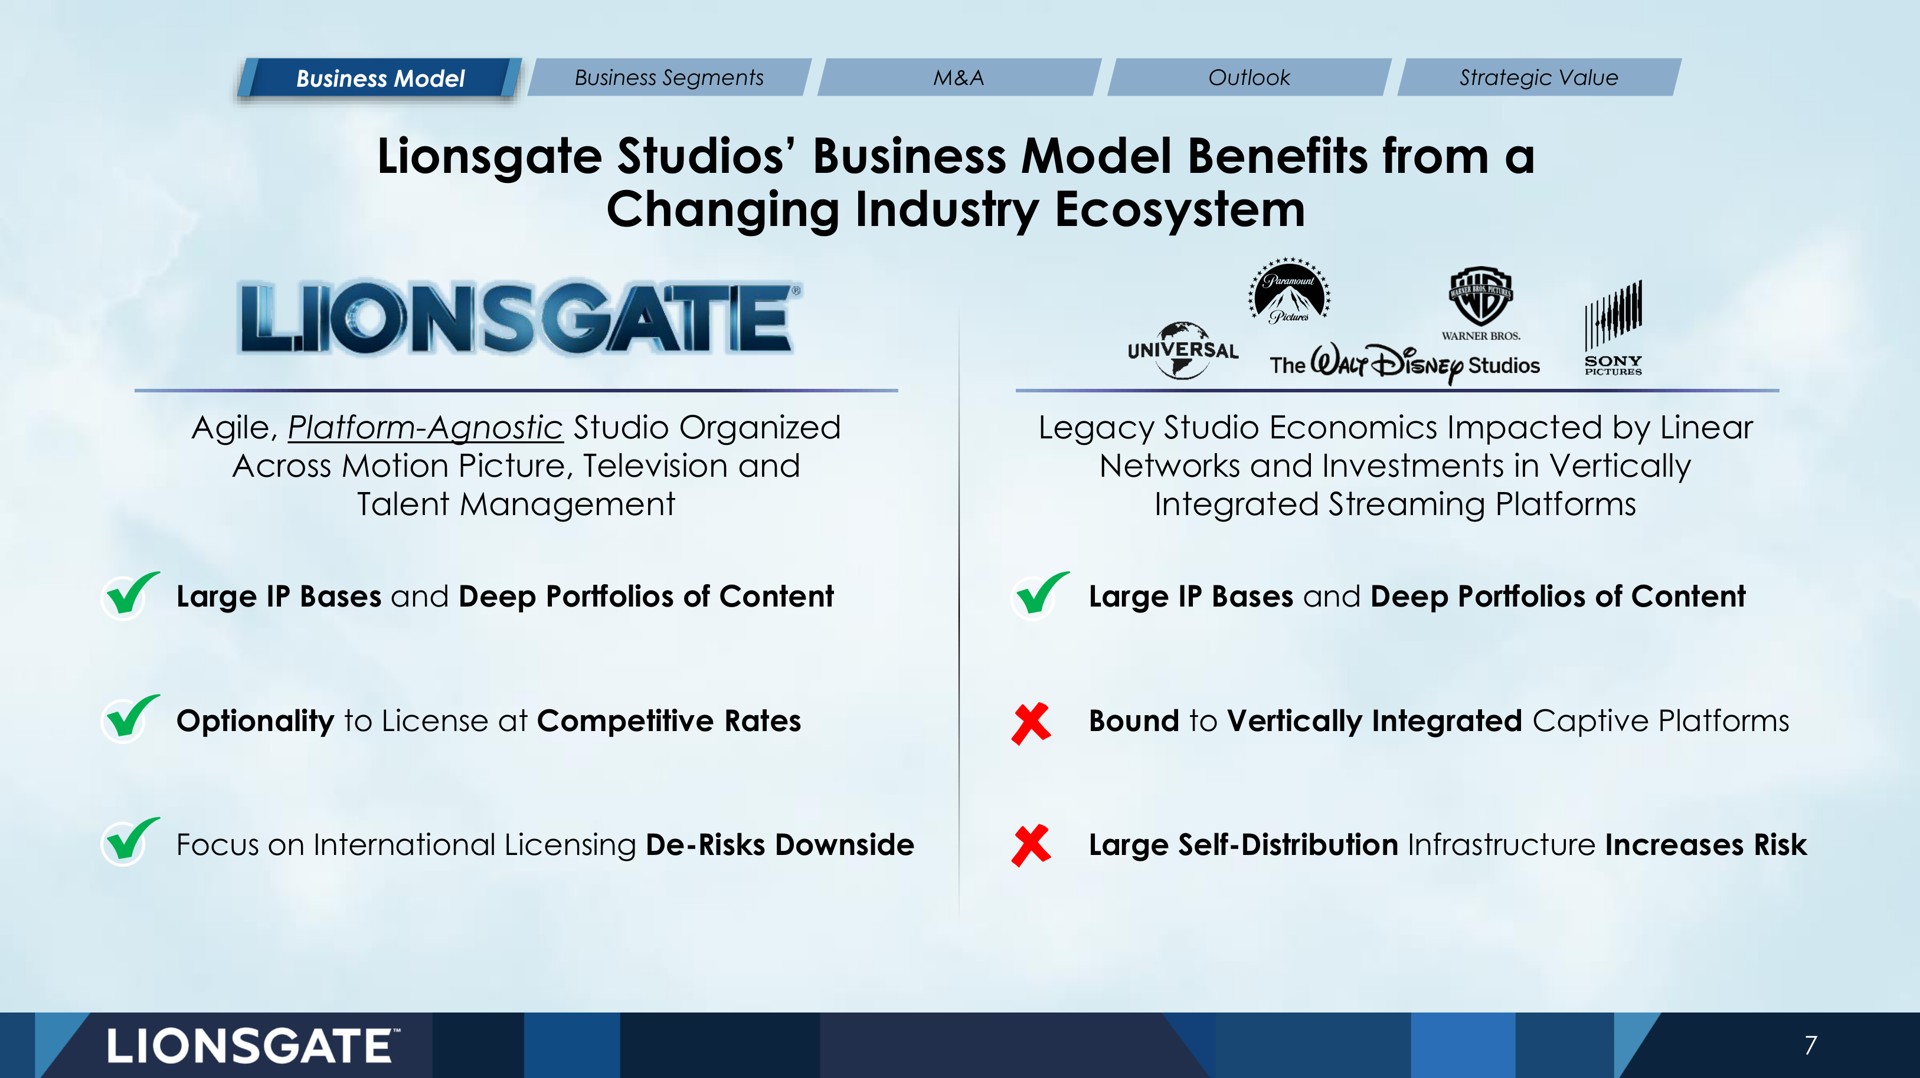 studios business model benefits from a changing industry ecosystem | Lionsgate